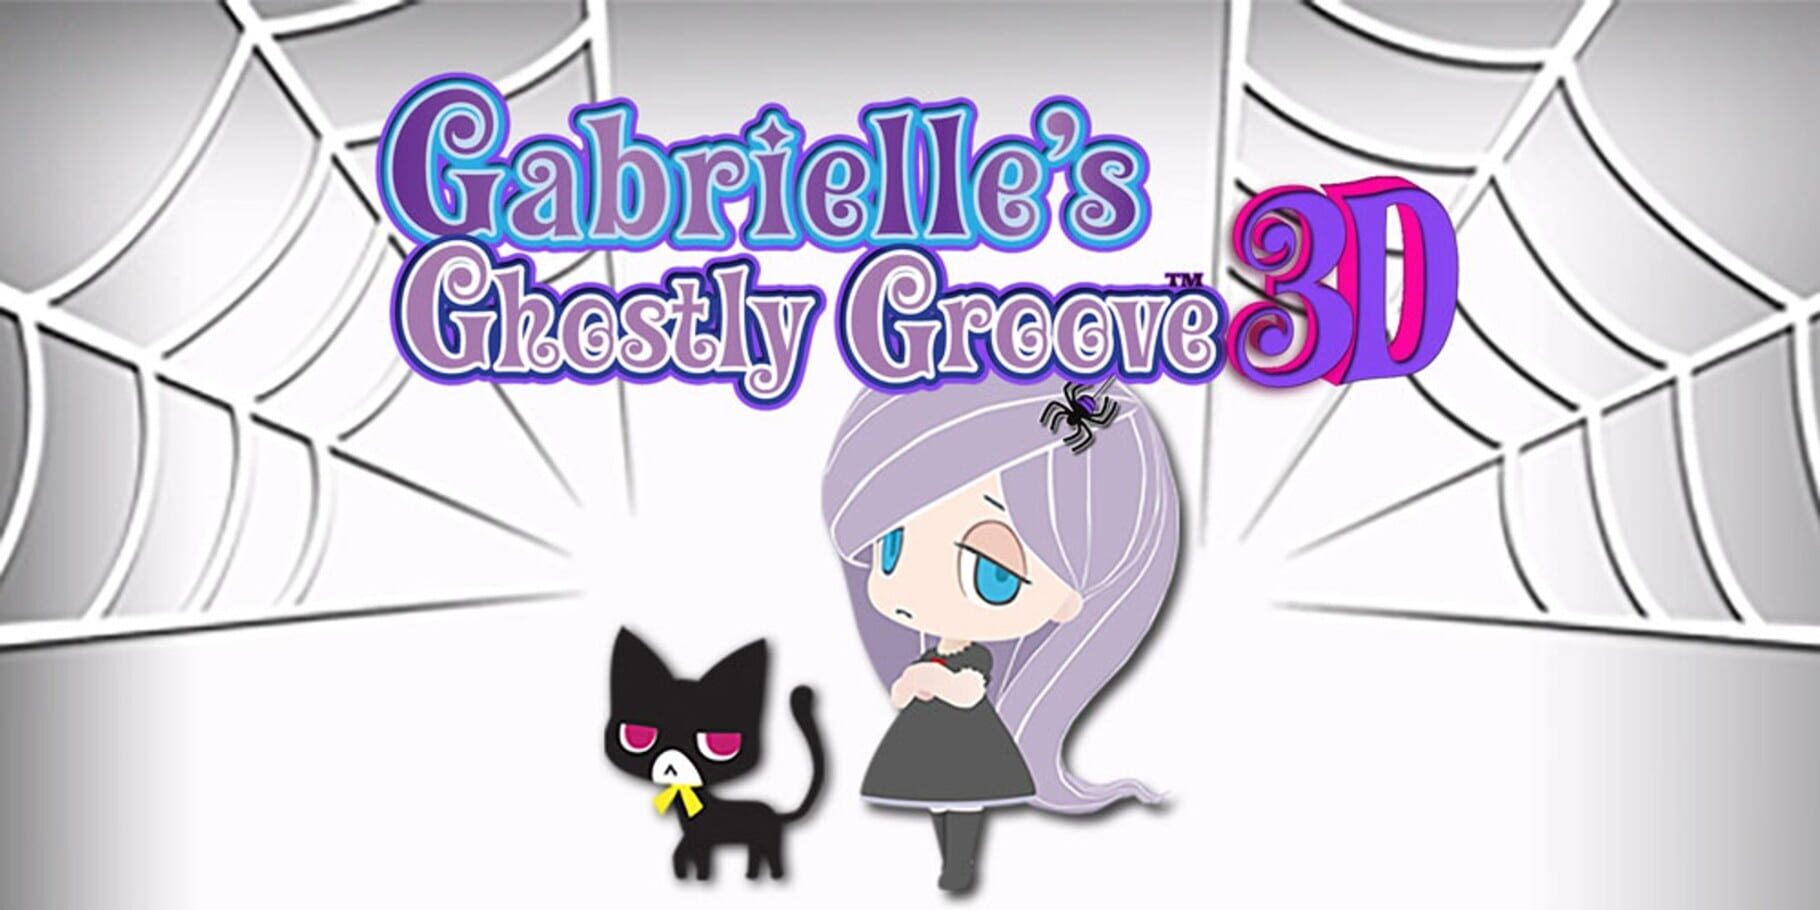 Arte - Gabrielle's Ghostly Groove 3D